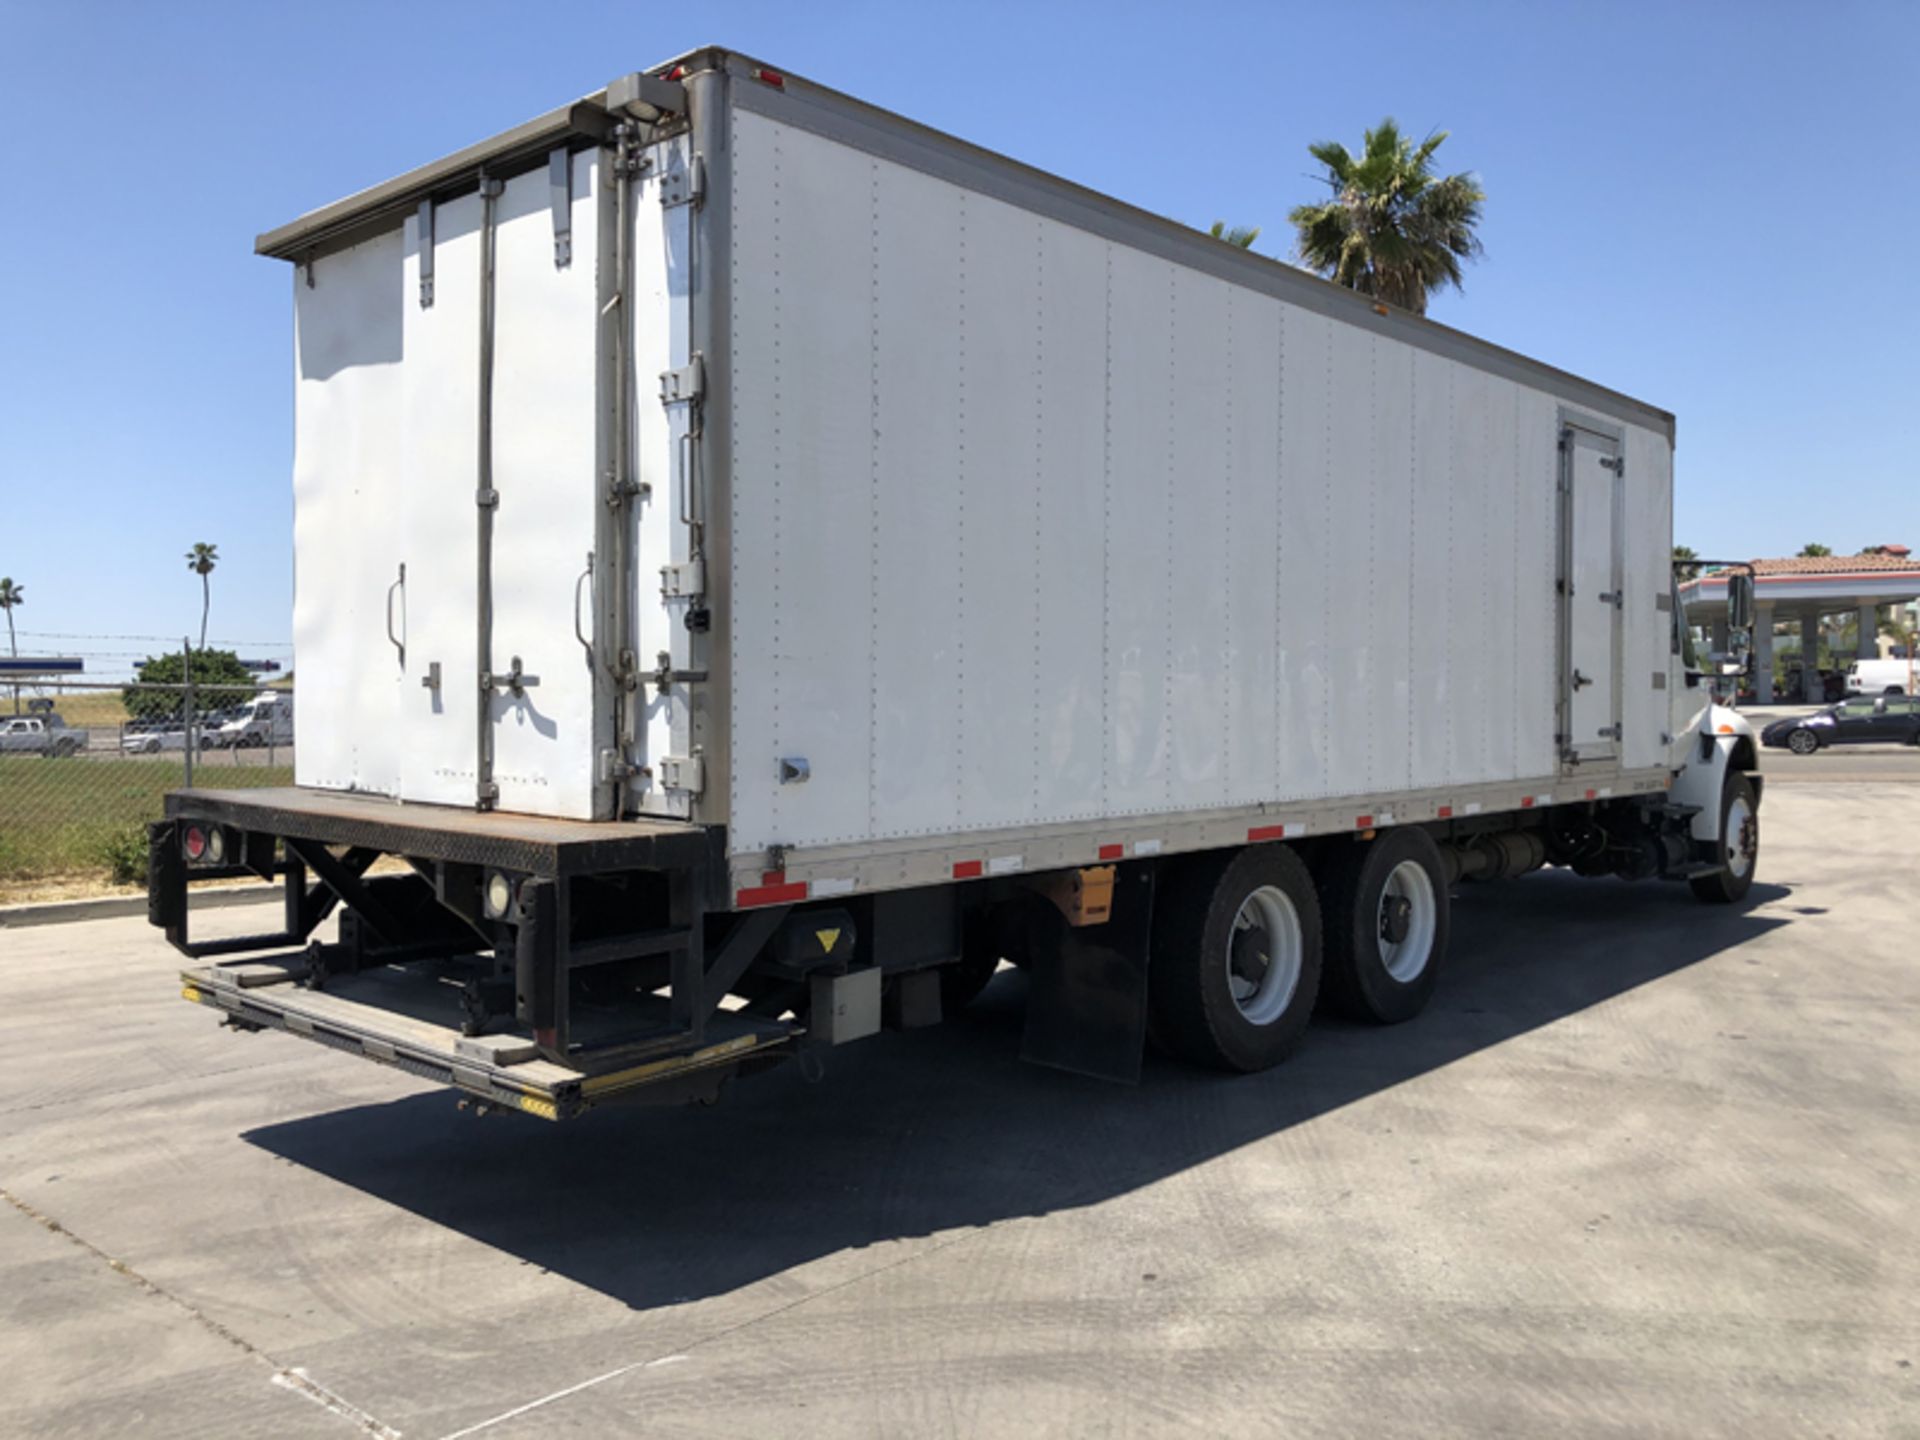 2018 INTERNATIONAL 4400 SBA 6X4 REFRIGERATED BOX TRUCK VIN#: 1HTMSTAR9JH528880, Approx Miles: 85689, - Image 4 of 10